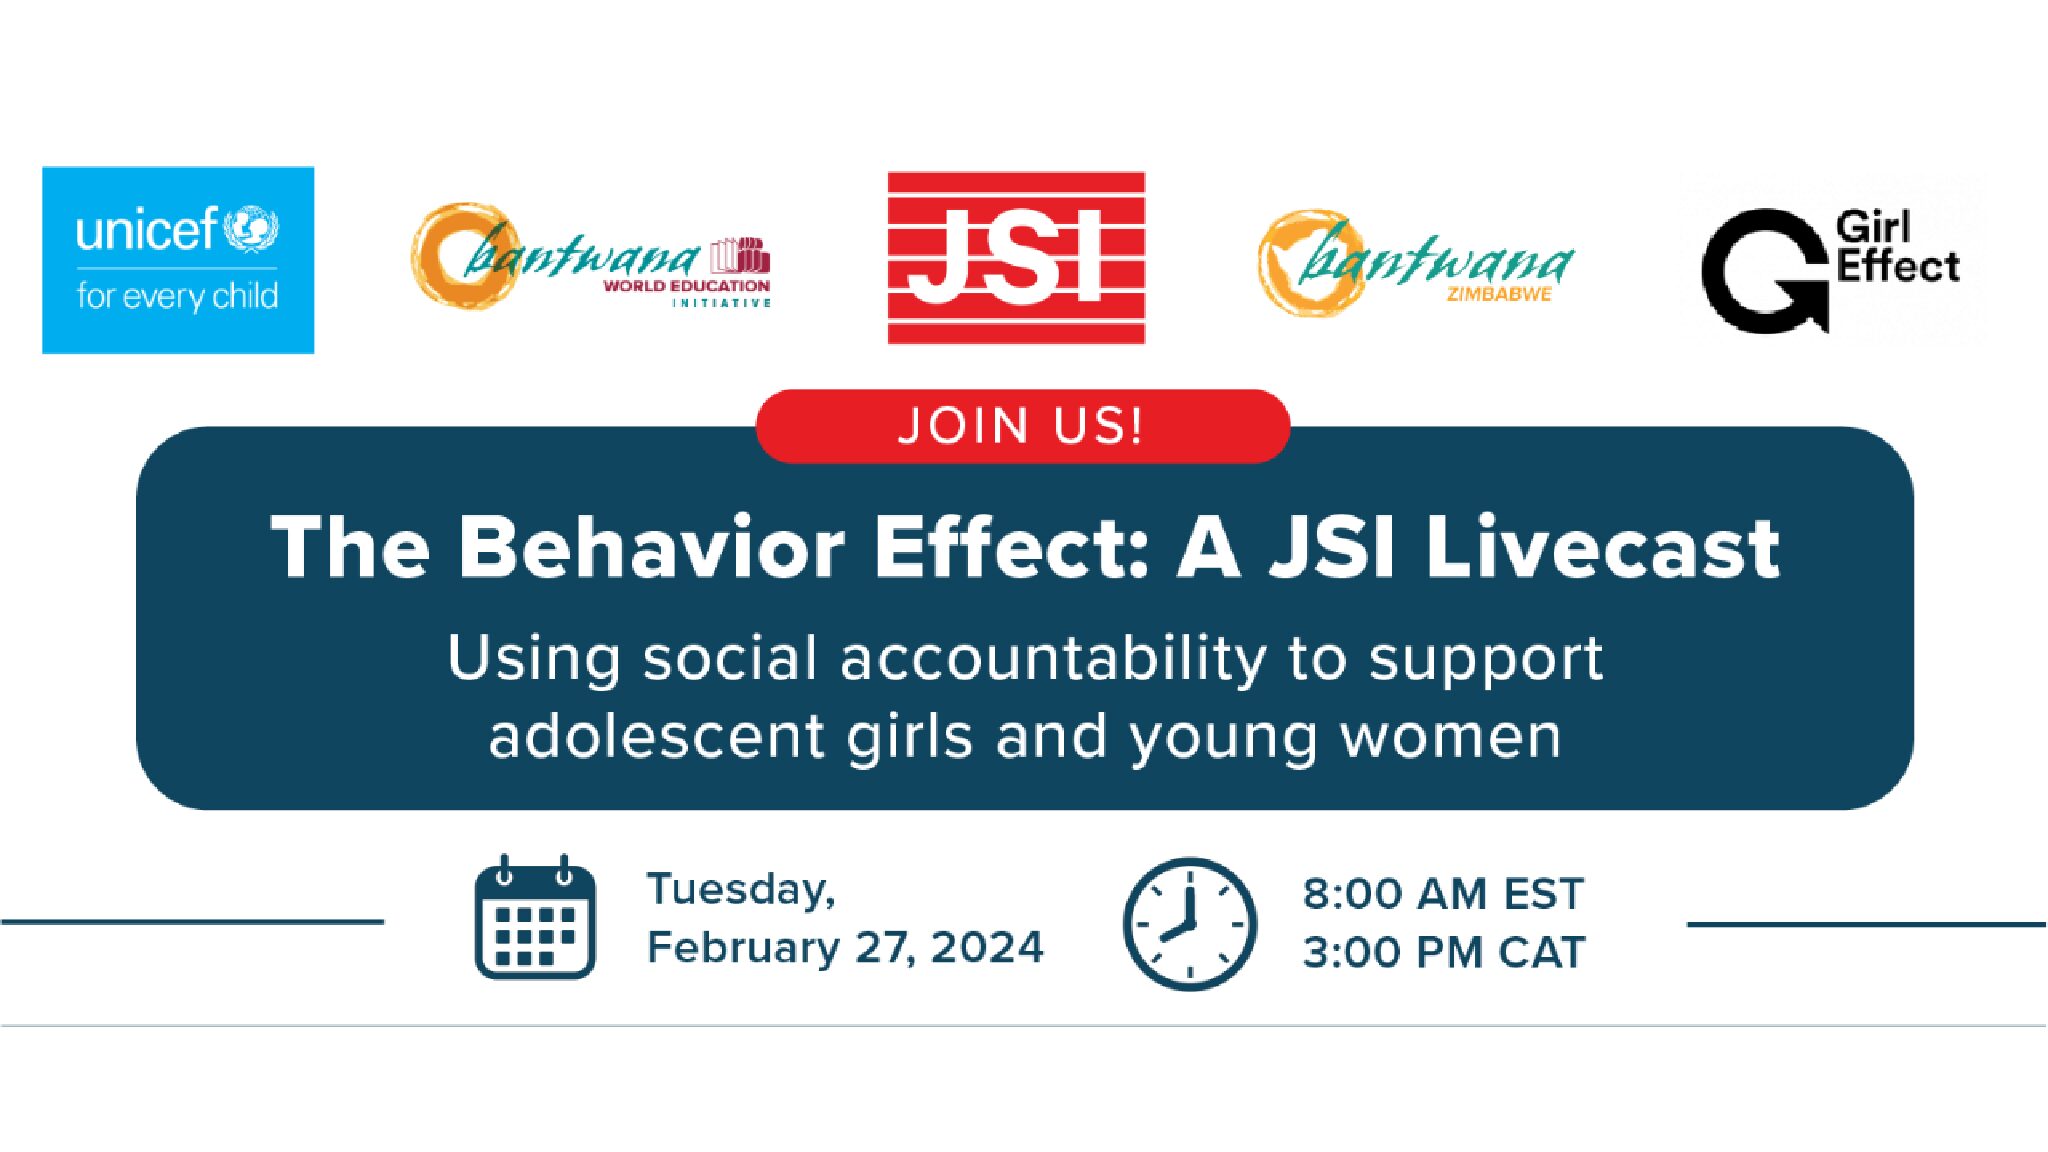 The Behavior Effect: Using Social Accountability to Support Adolescent Girls and Young Women